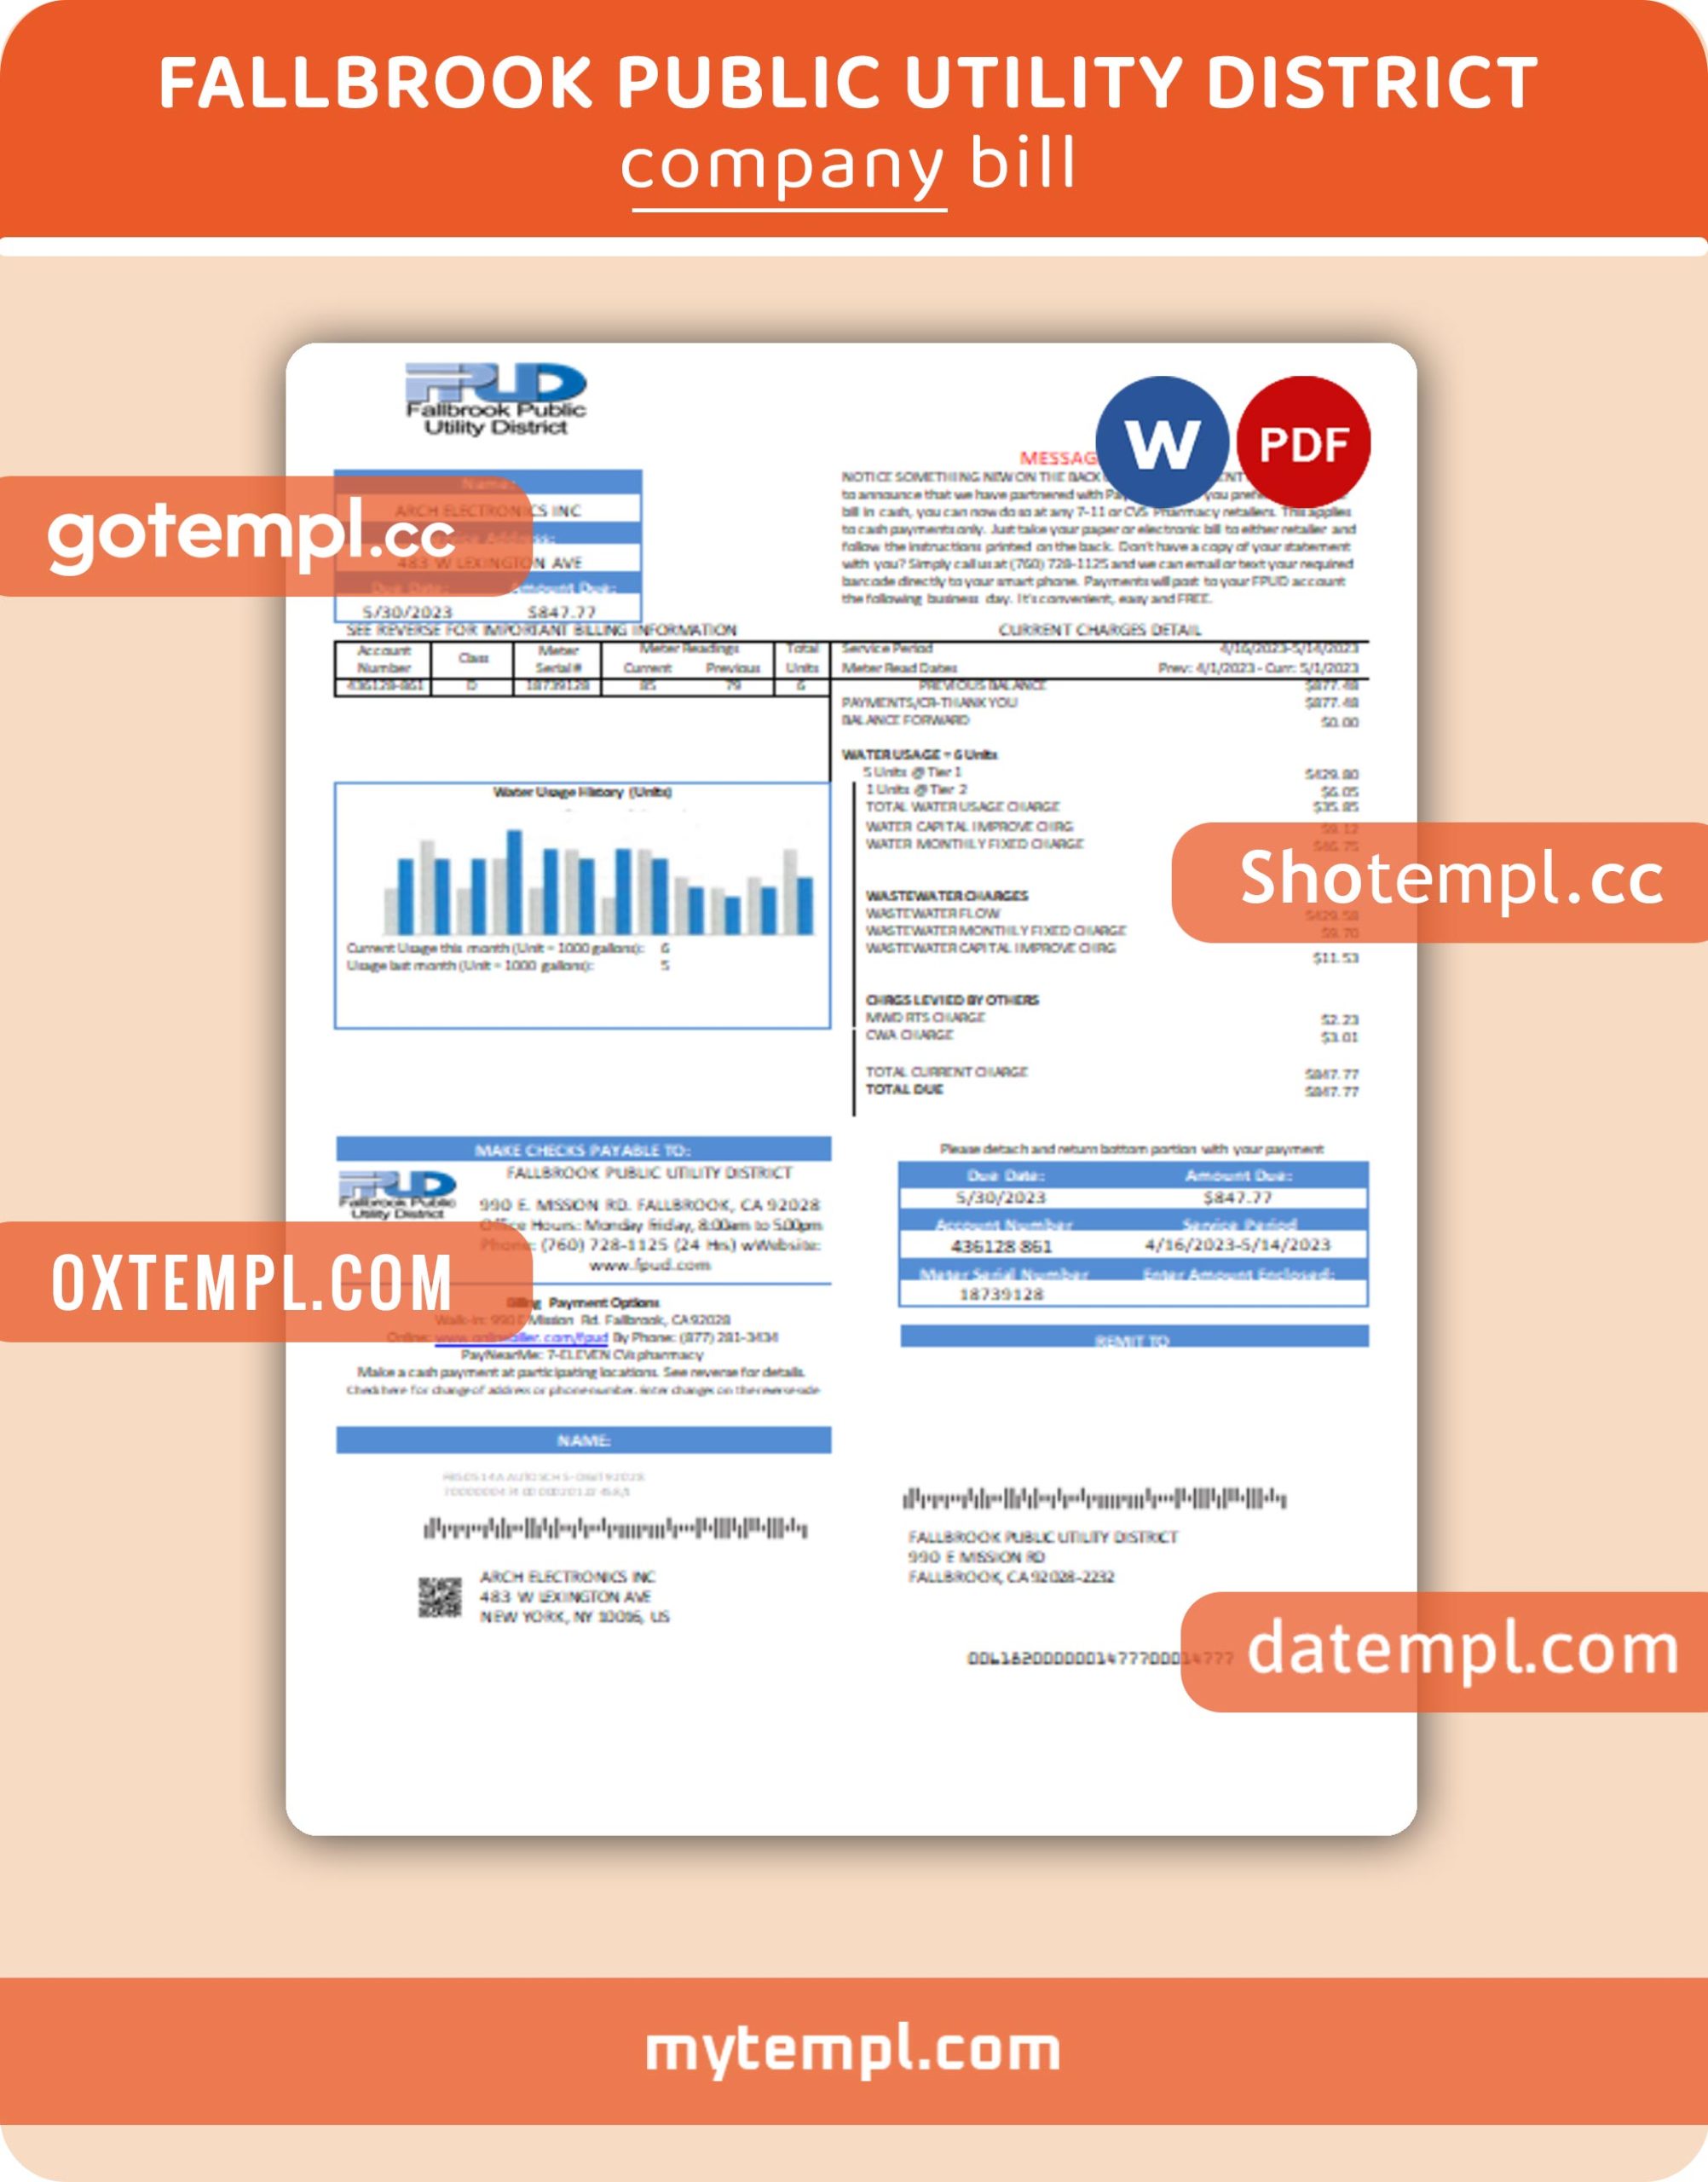 Legal invoice template in word and pdf format